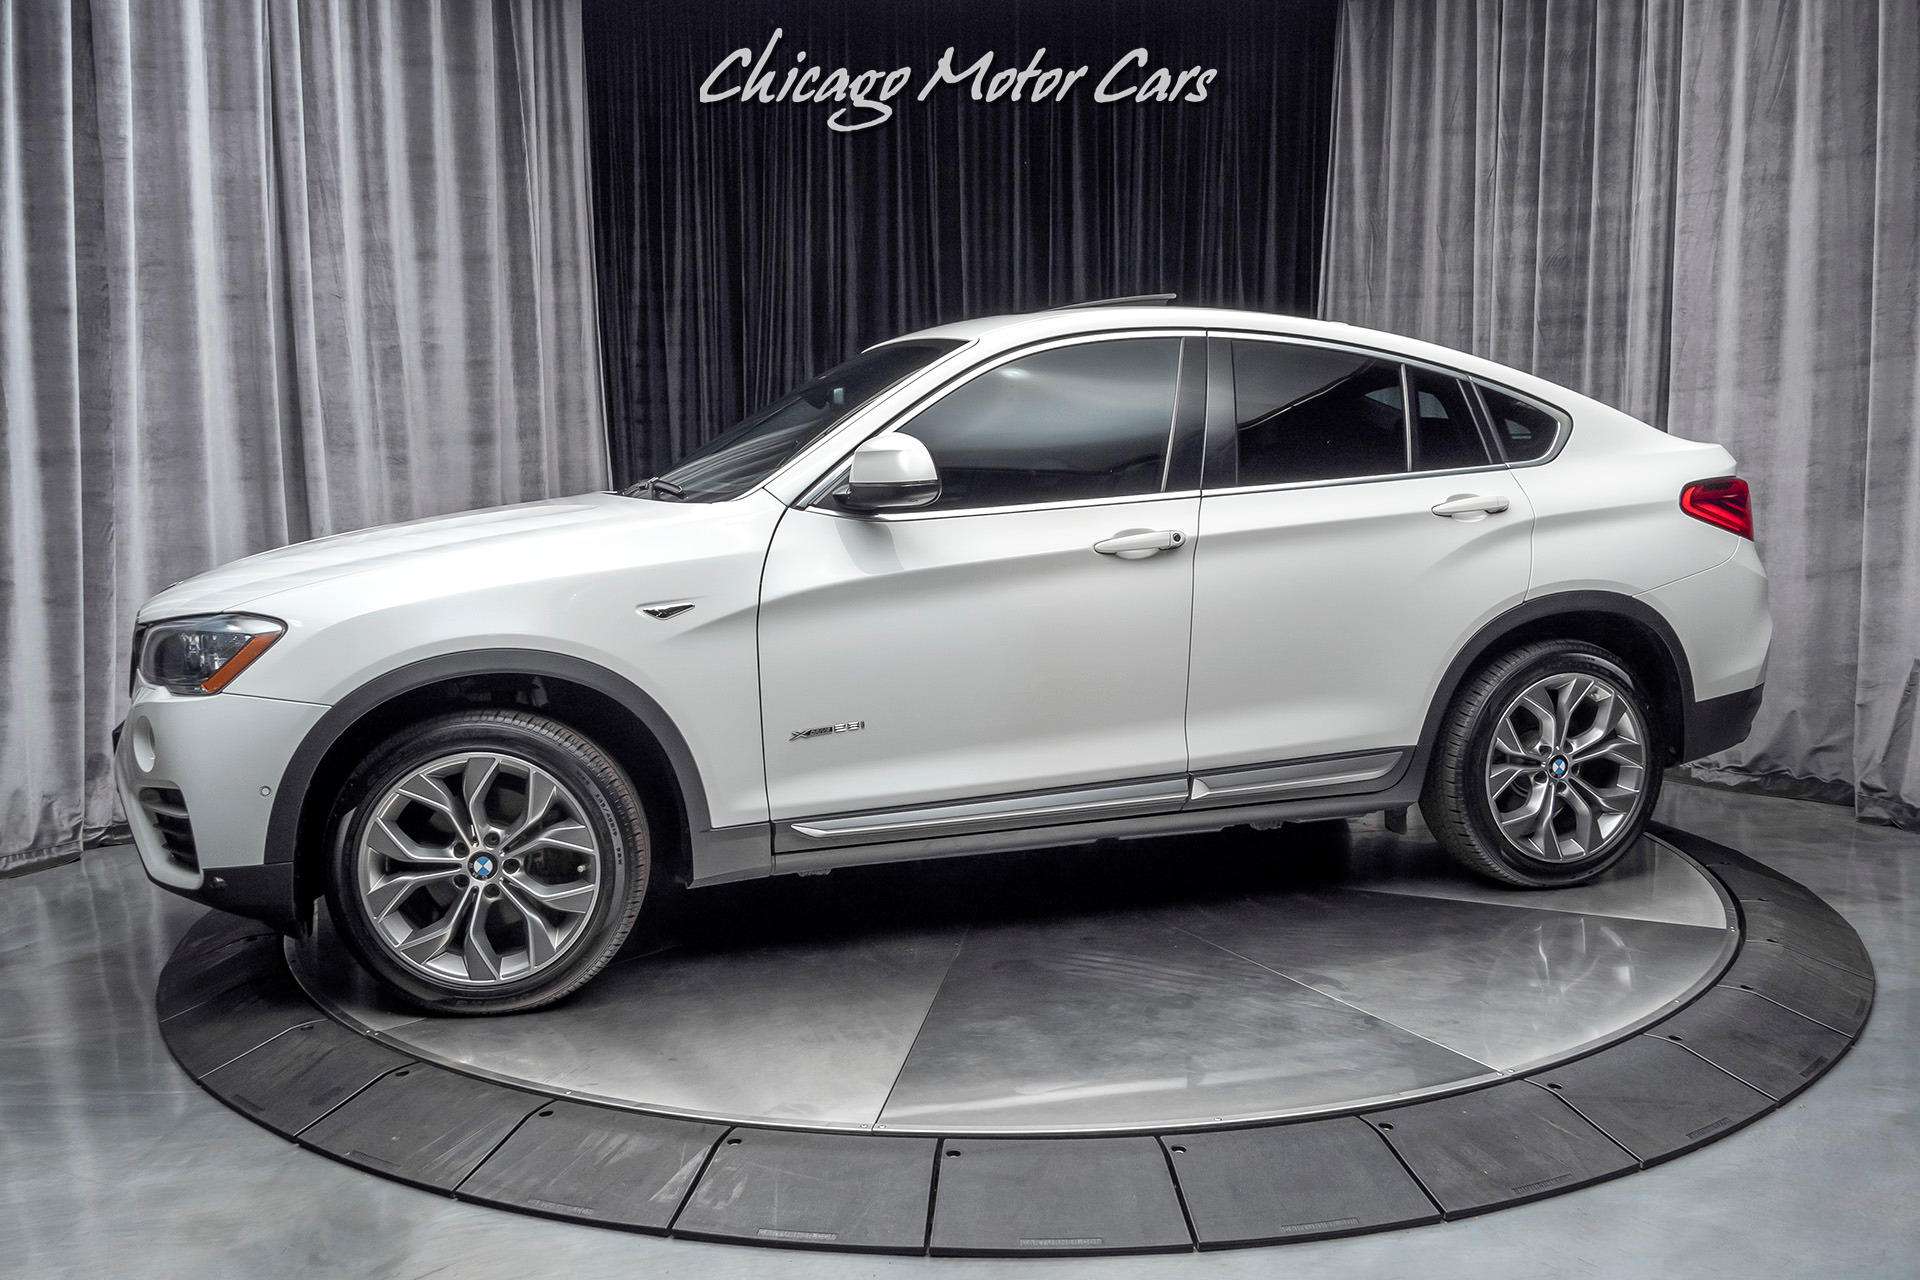 Used 2018 BMW X4 xDrive28i $53k+MSRP! Driving Assistance Pkg! For Sale  (Special Pricing) | Chicago Motor Cars Stock #17611